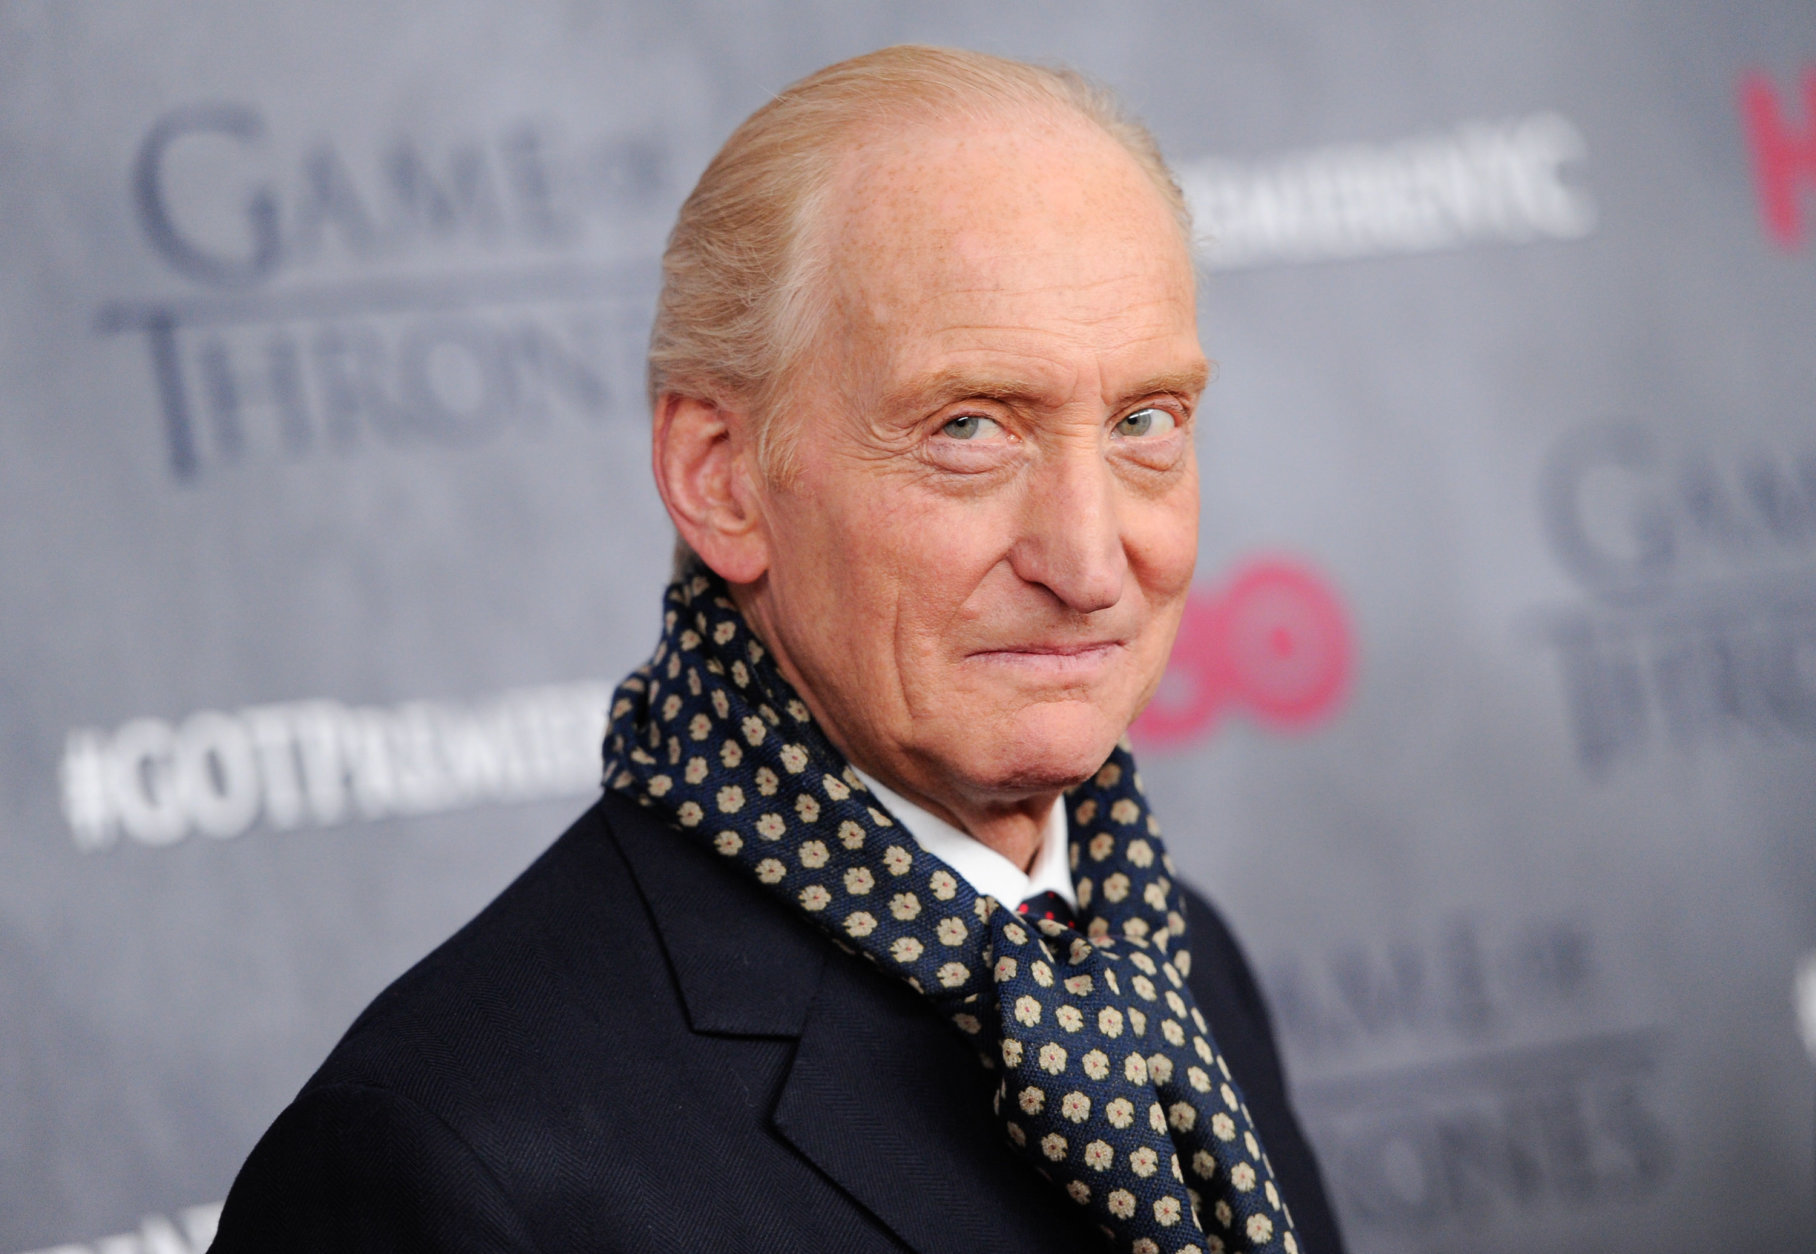 Actor Charles Dance attends HBO's "Game of Thrones" fourth season premiere at Avery Fisher Hall on Tuesday, March 18, 2014 in New York. (Photo by Evan Agostini/Invision/AP)